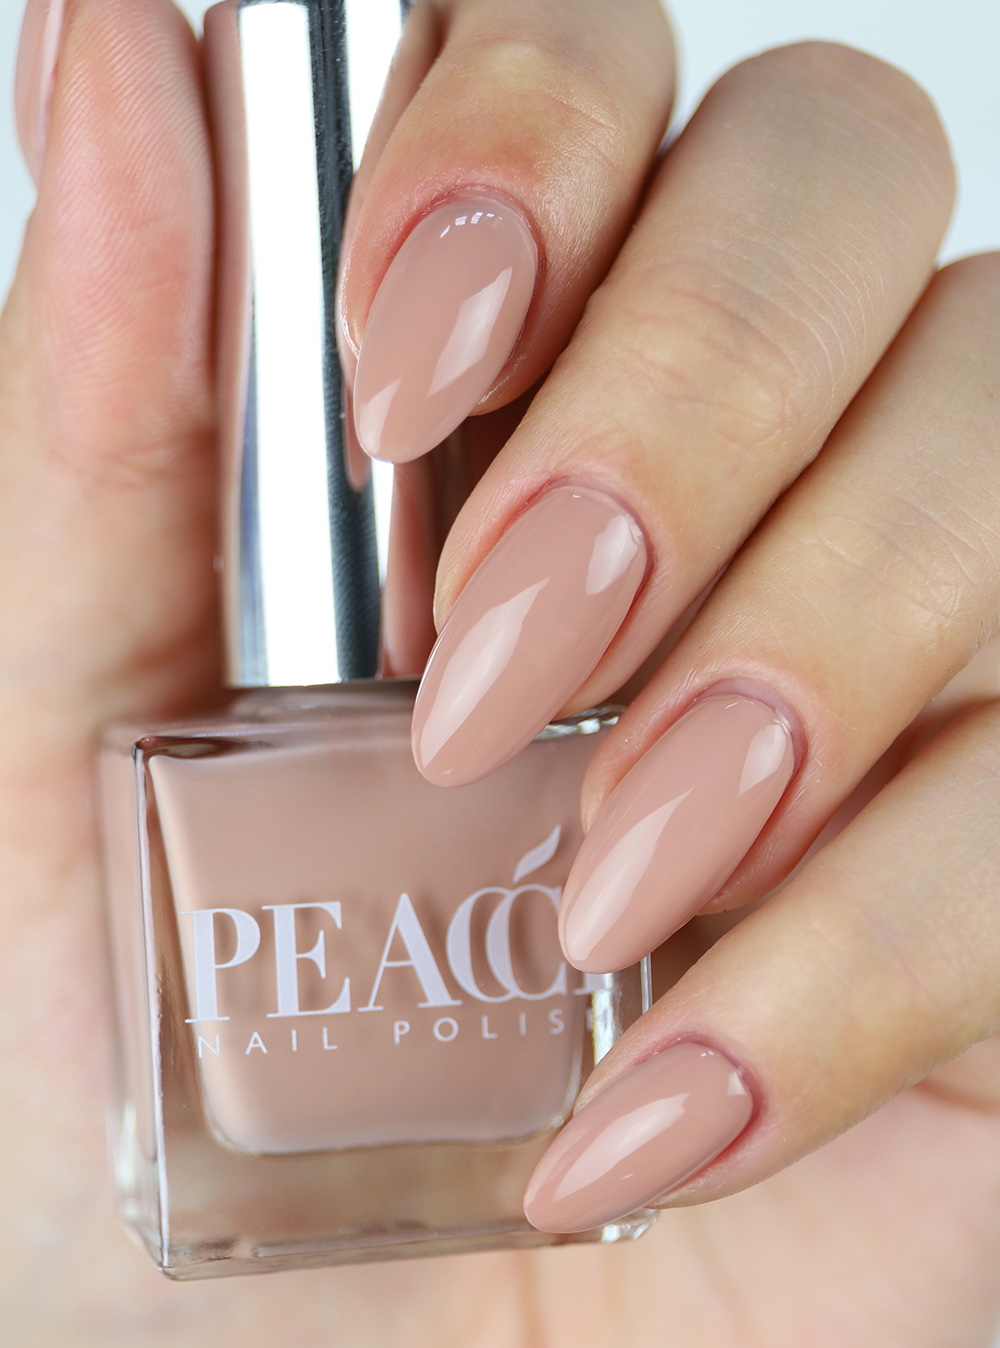 Nude Nails Hottest 70+ Spring Nail Colors - 9